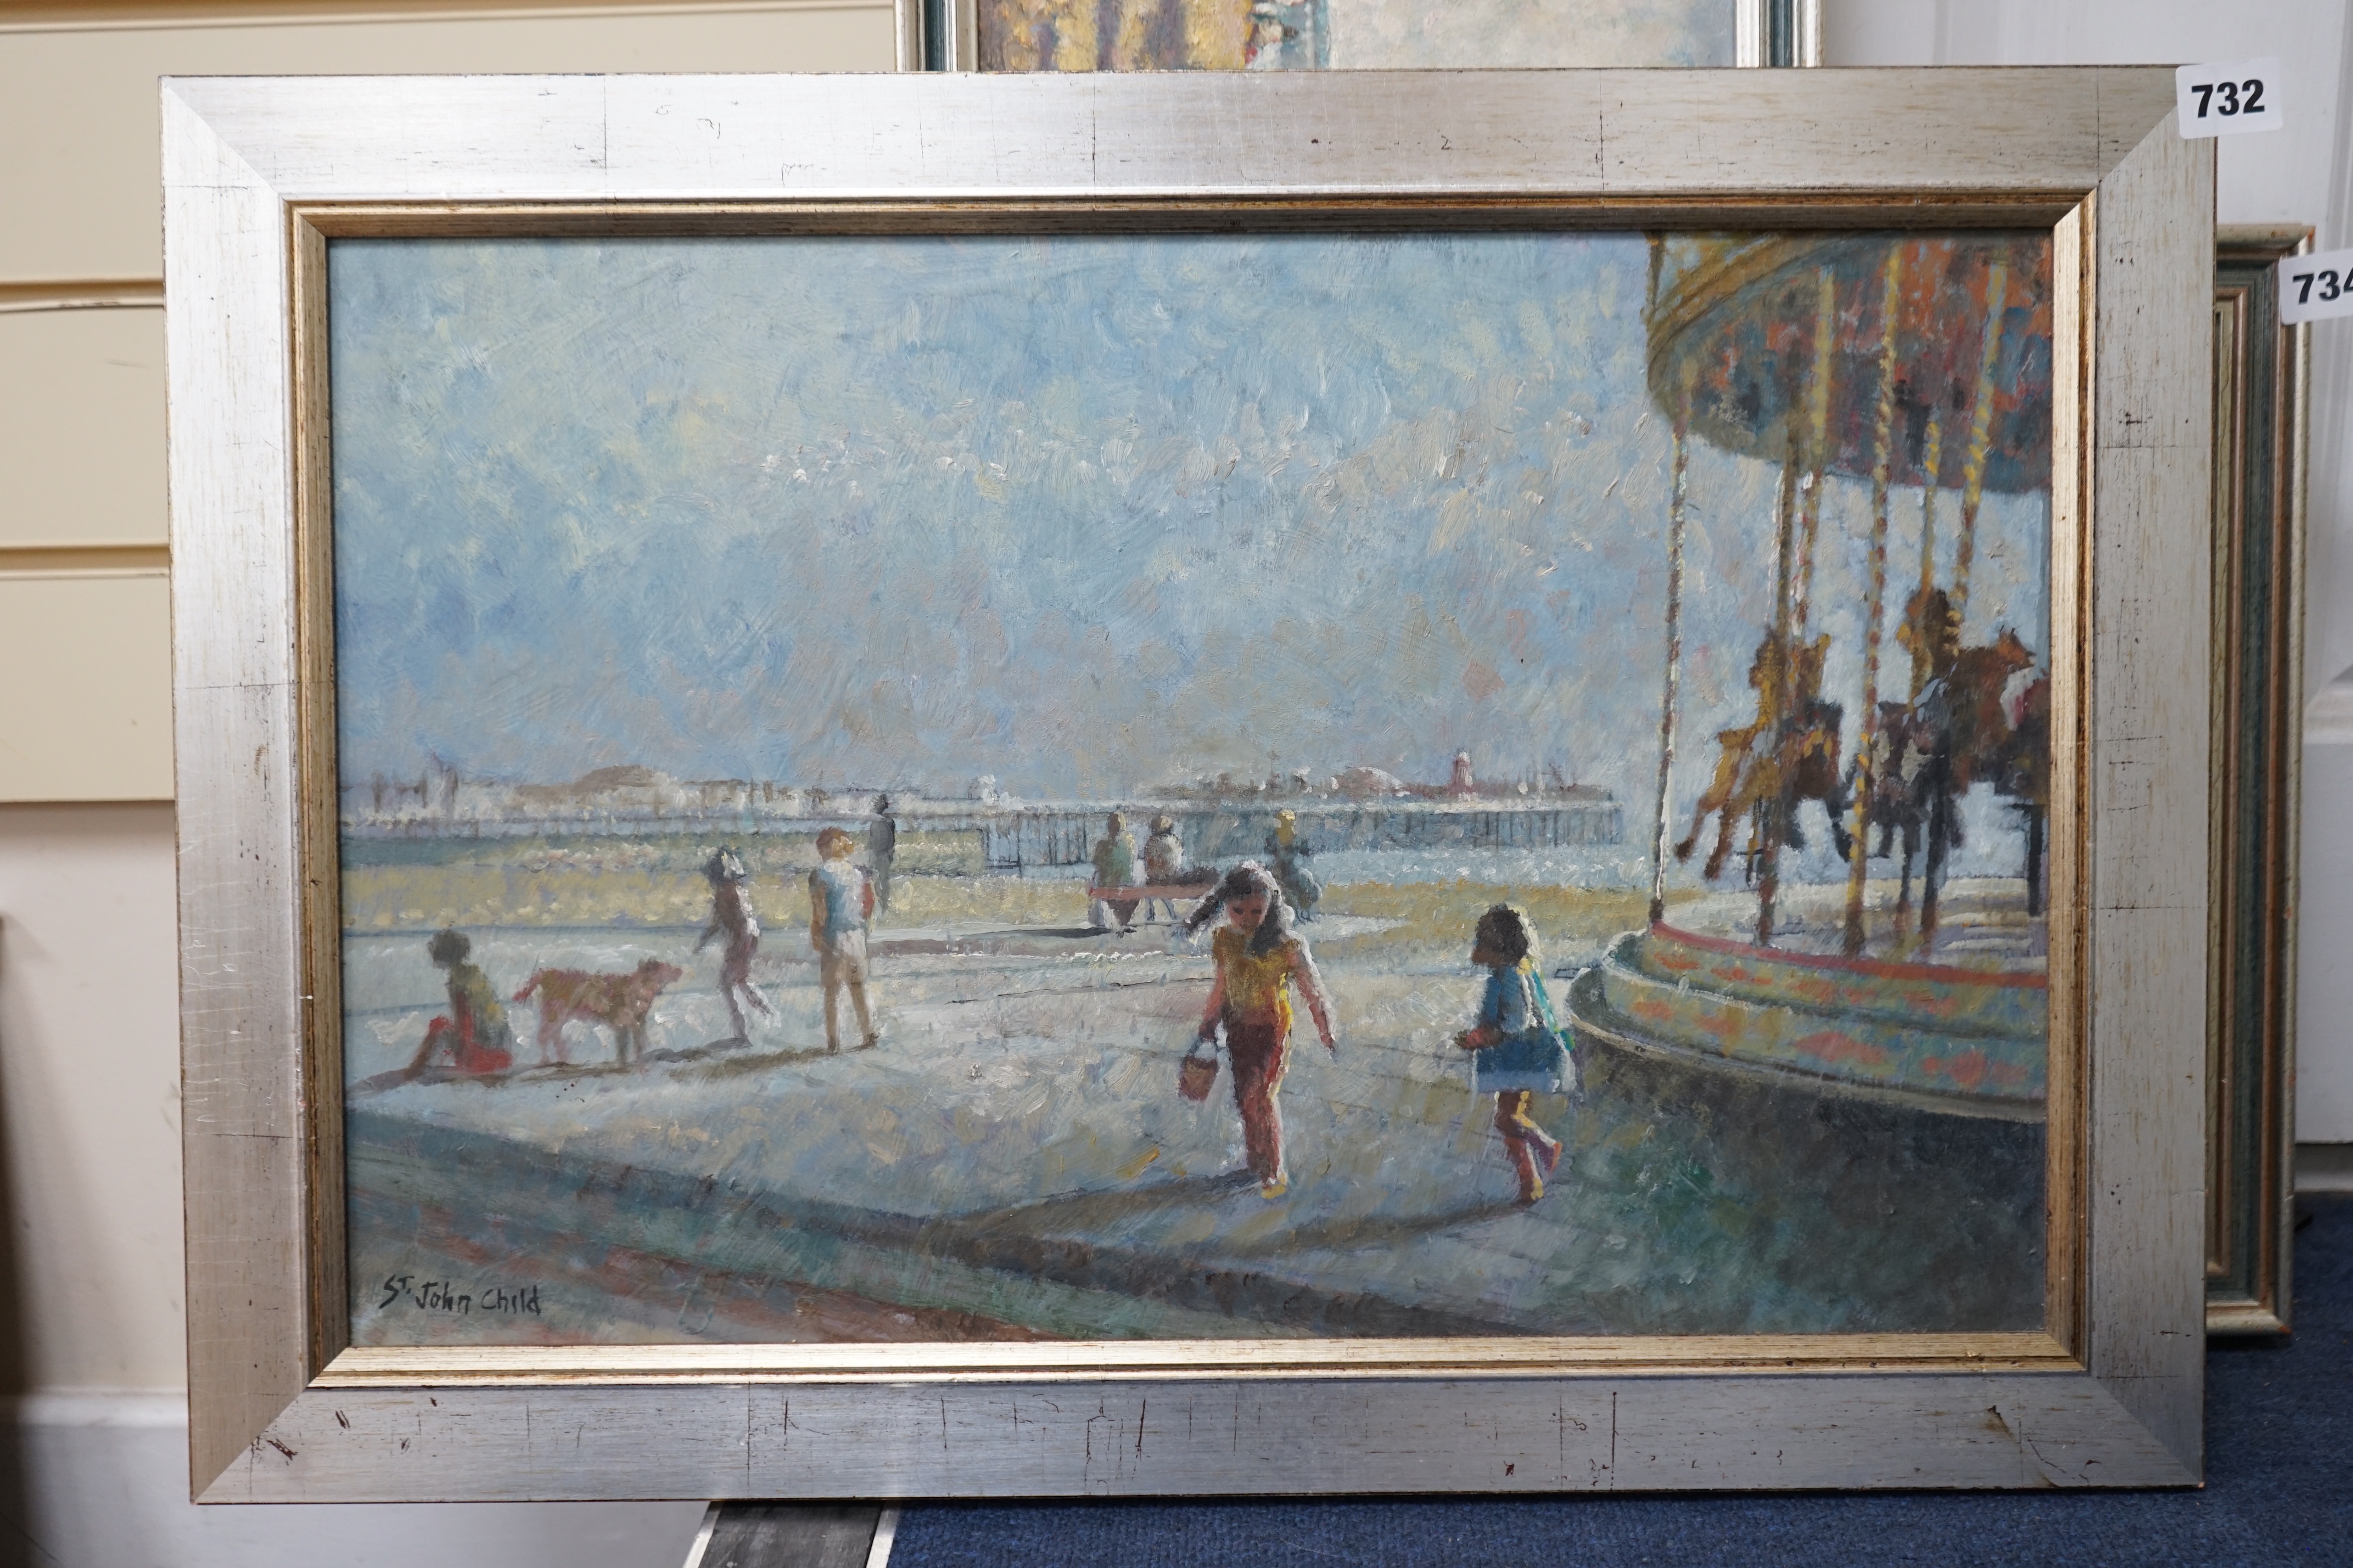 St John Child (b.1936), oil on board, Brighton view onto Palace Pier, signed, 34 x 53cm